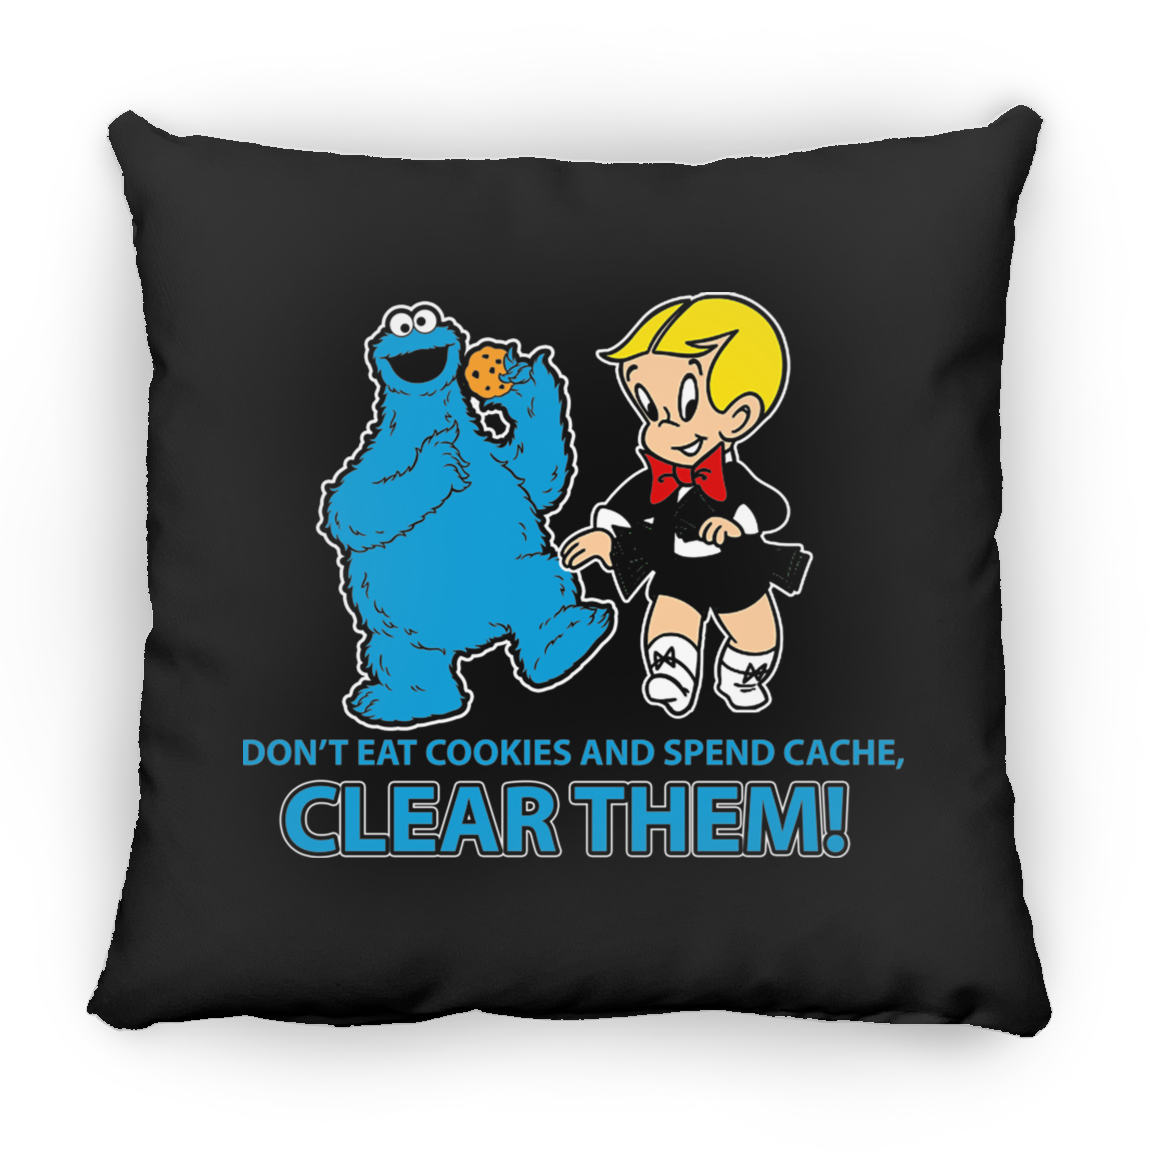 ArtichokeUSA Custom Design. Don't Eat Cookies And Spend Cache! Delete Them! Cookie Monster and Richie Rich Fan Art/Parody. Square Pillow 18x18